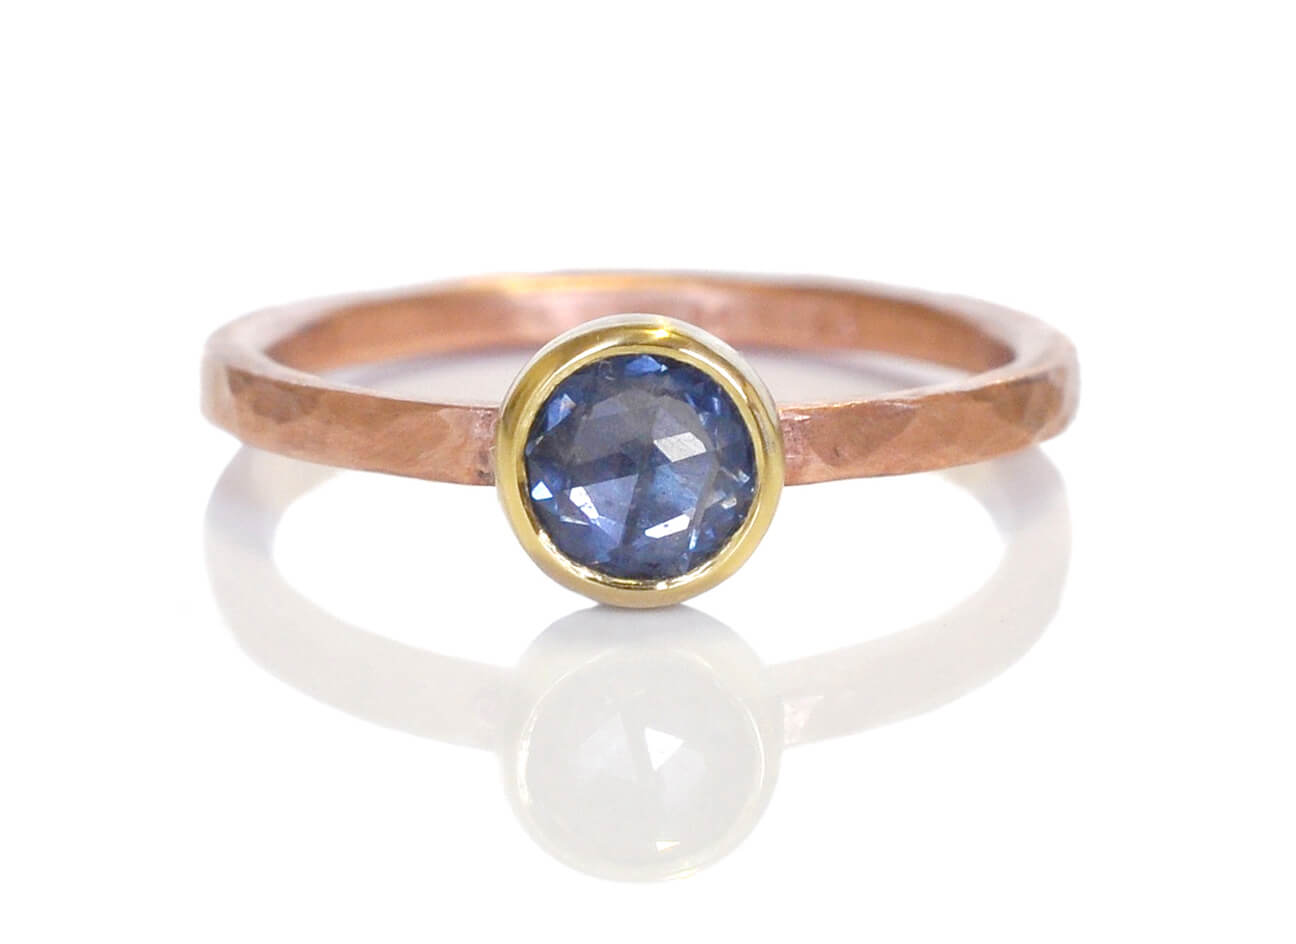 Rose cut sapphire ring on a rose gold band.